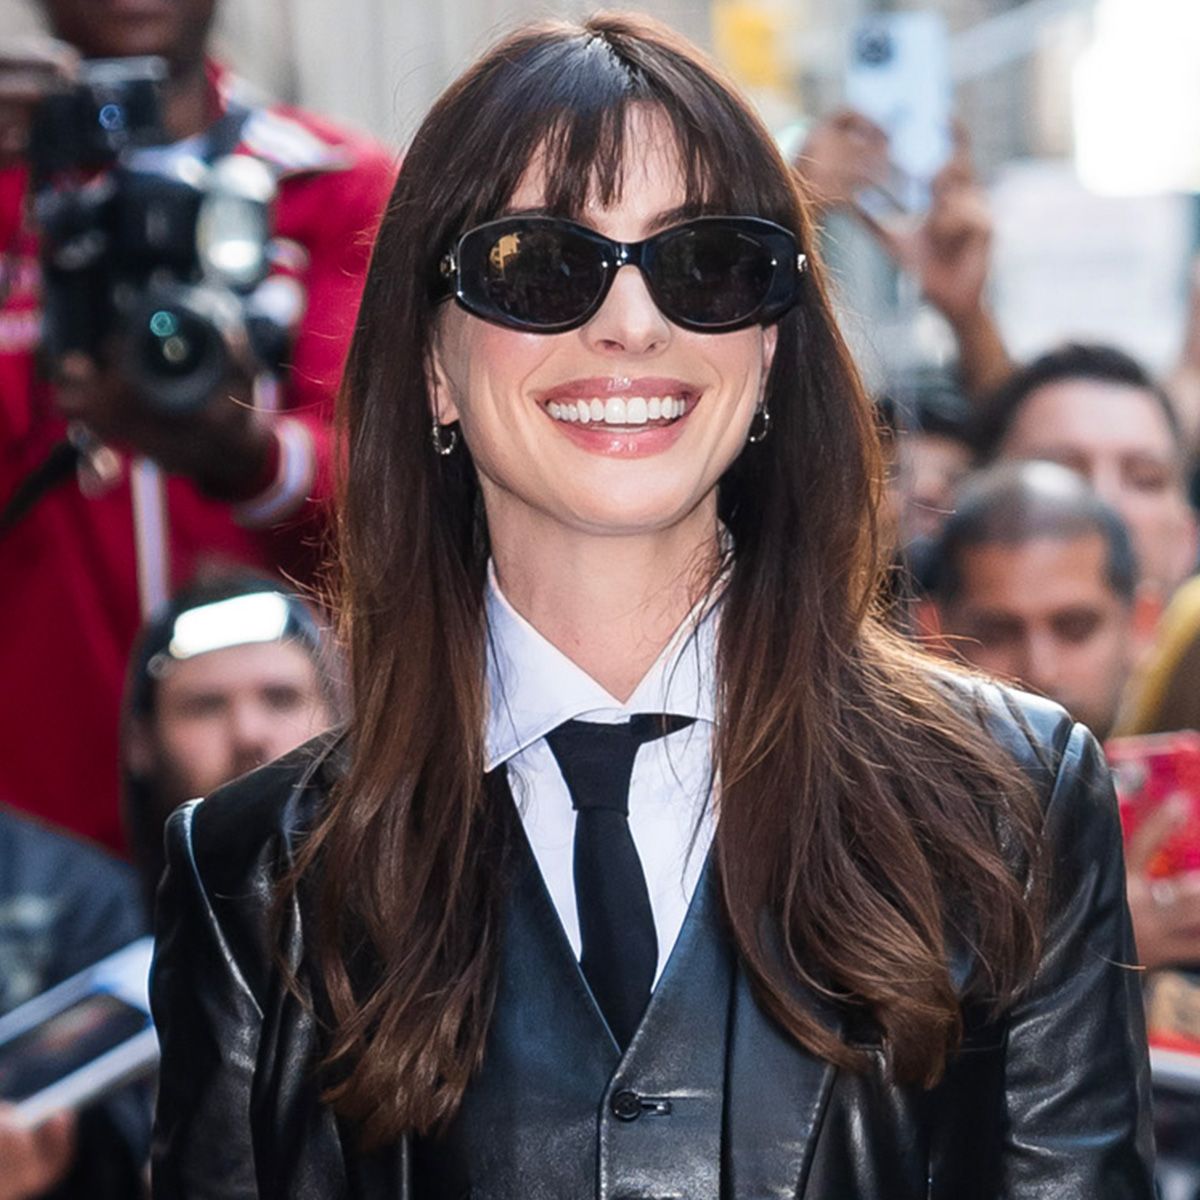 Anne Hathaway Wore Skinny Leather Pants With This Hyper Elegant Shoe Trend